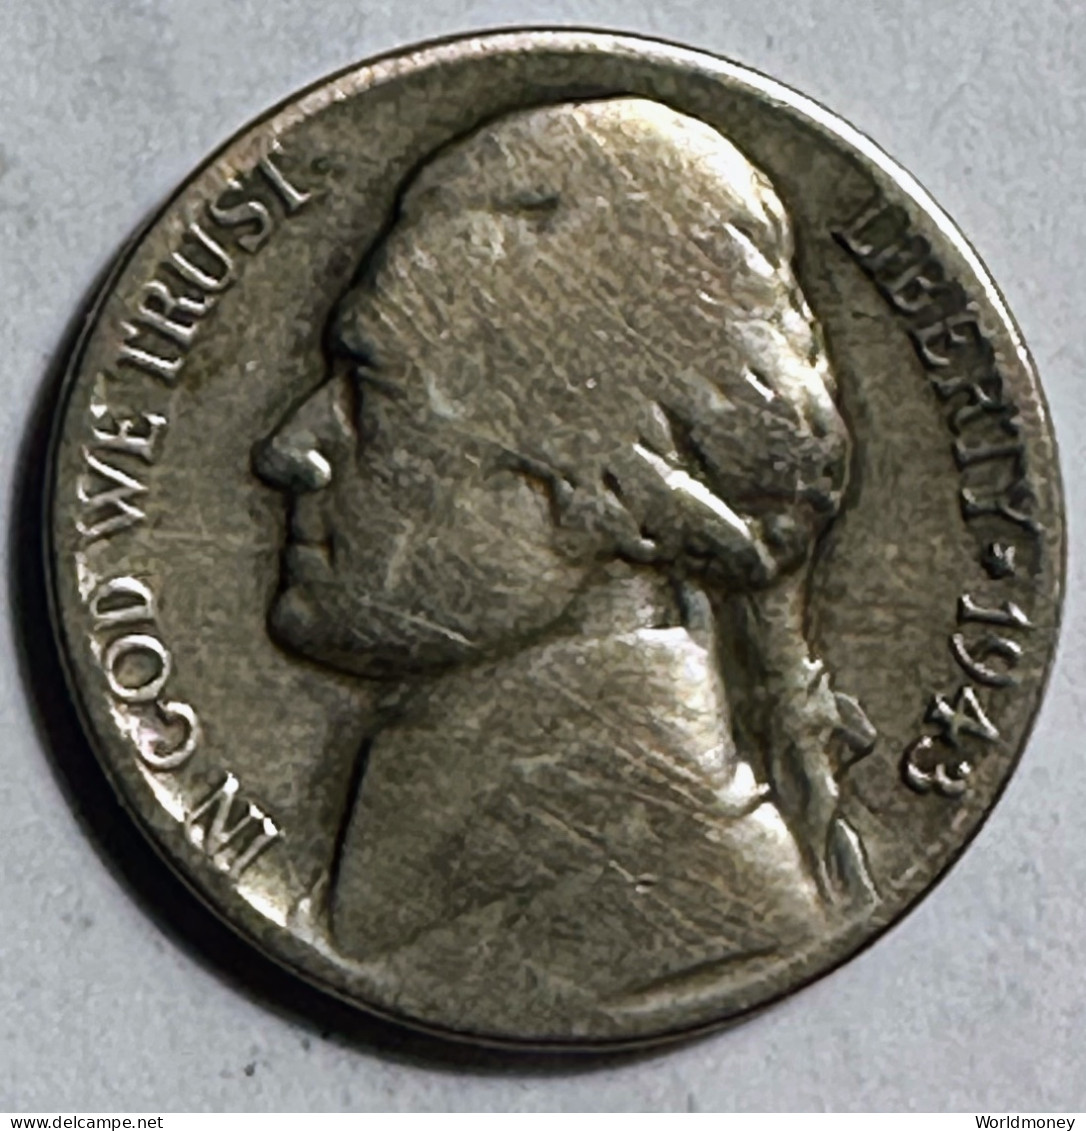 United States 5 Cents 1943 P (Silver) - 1938-42: Pre-war Composition